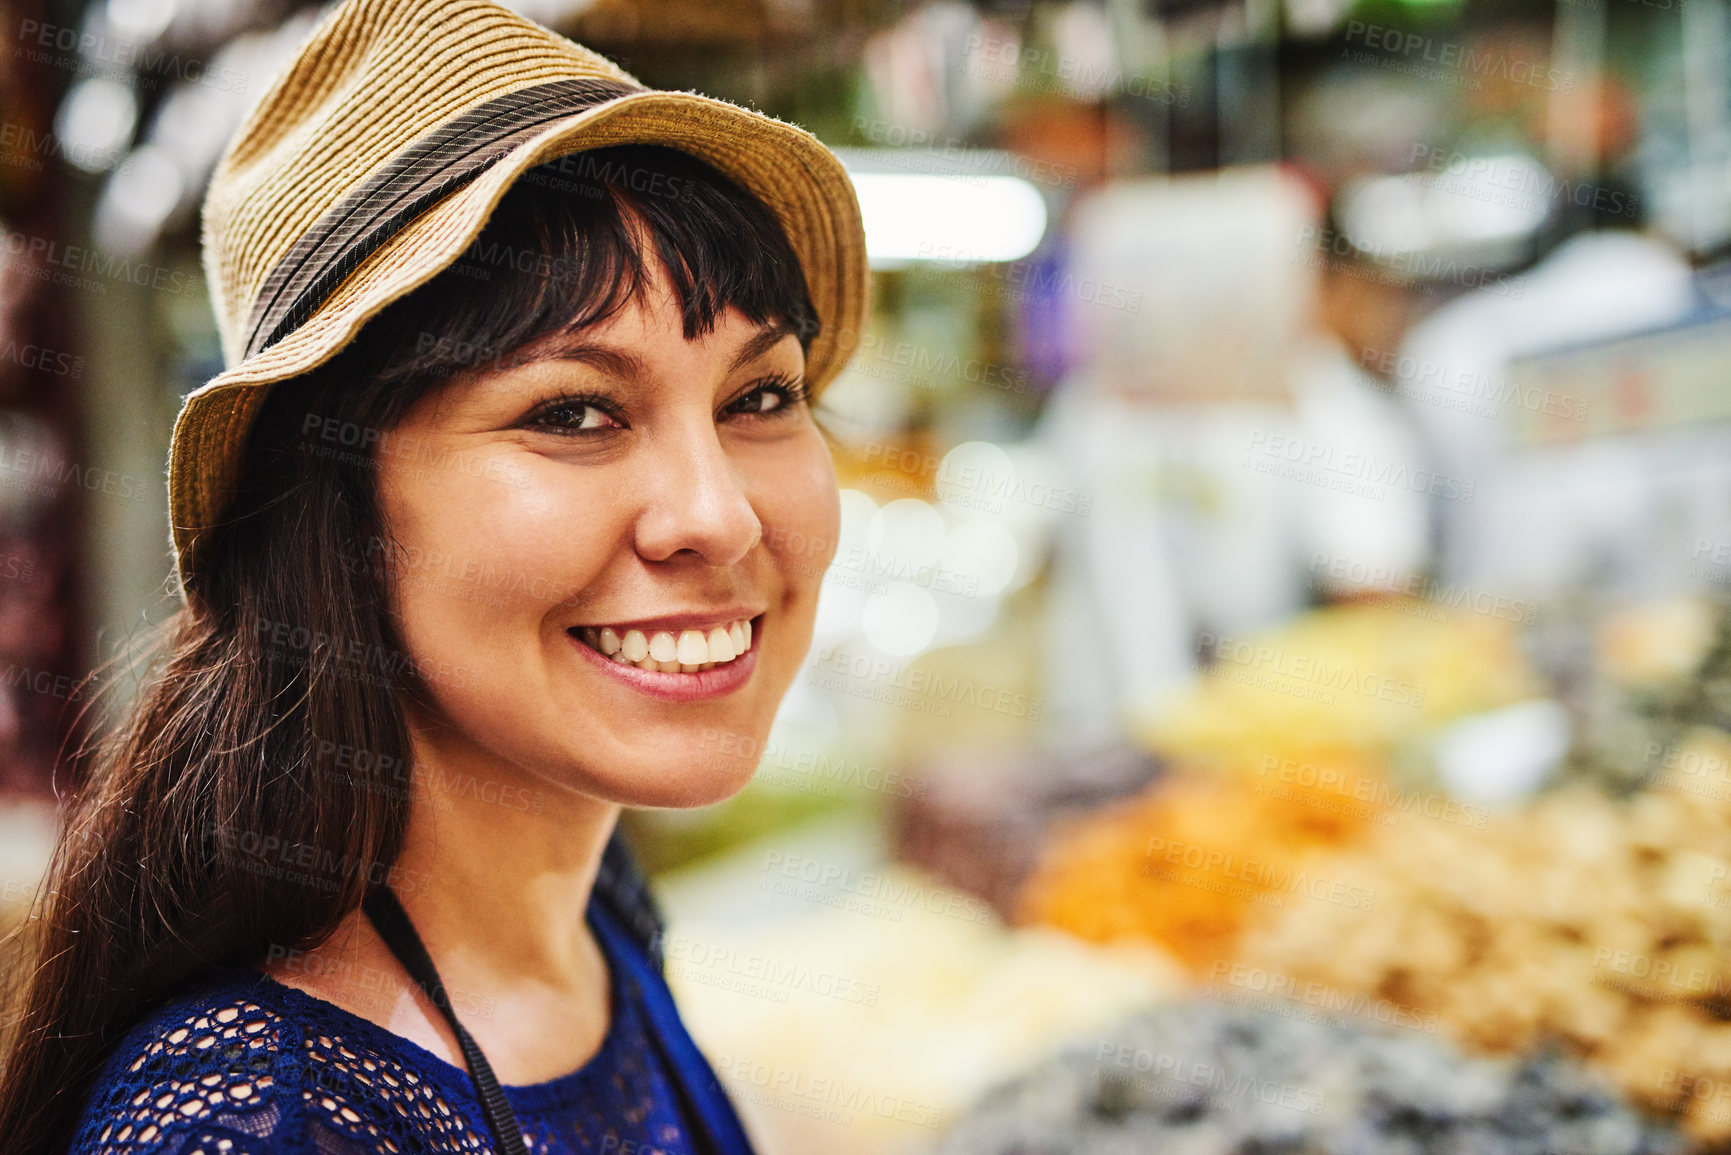 Buy stock photo Portrait of a cheerful young woman standing in the middle of a busy market outside during the day